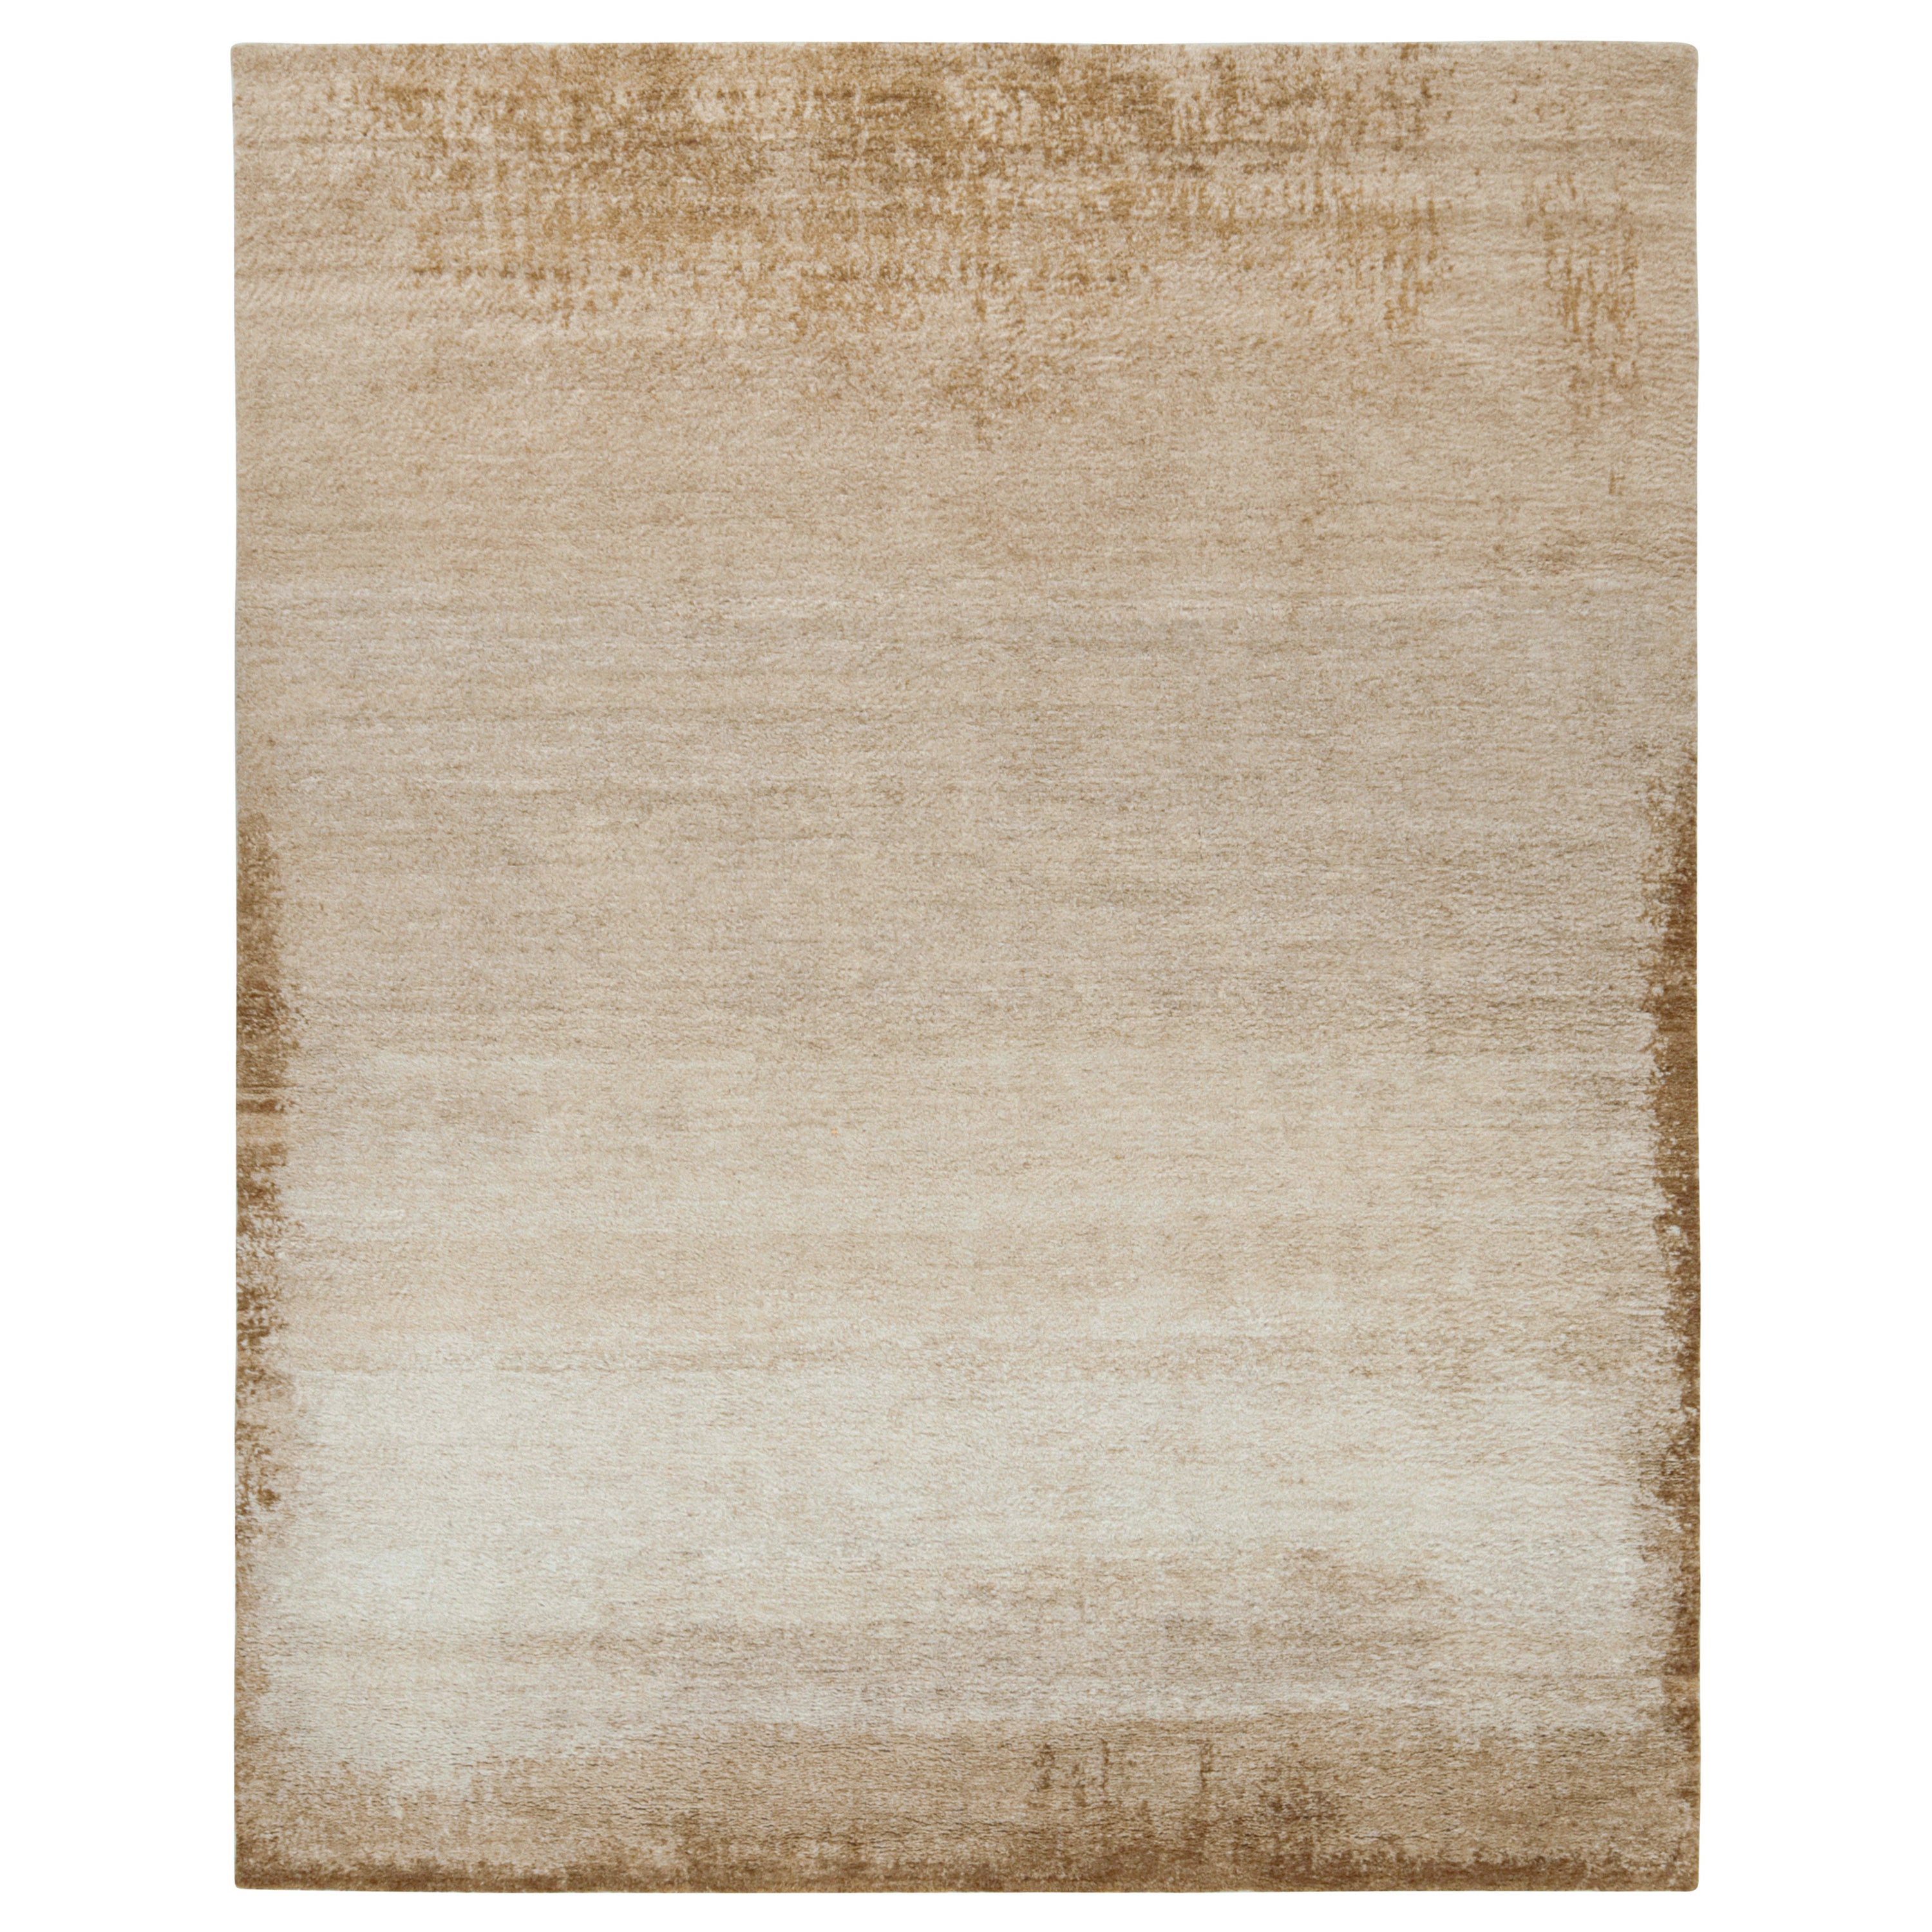 Rug & Kilim’s Contemporary Textural Rug in Beige-Brown High Pile 